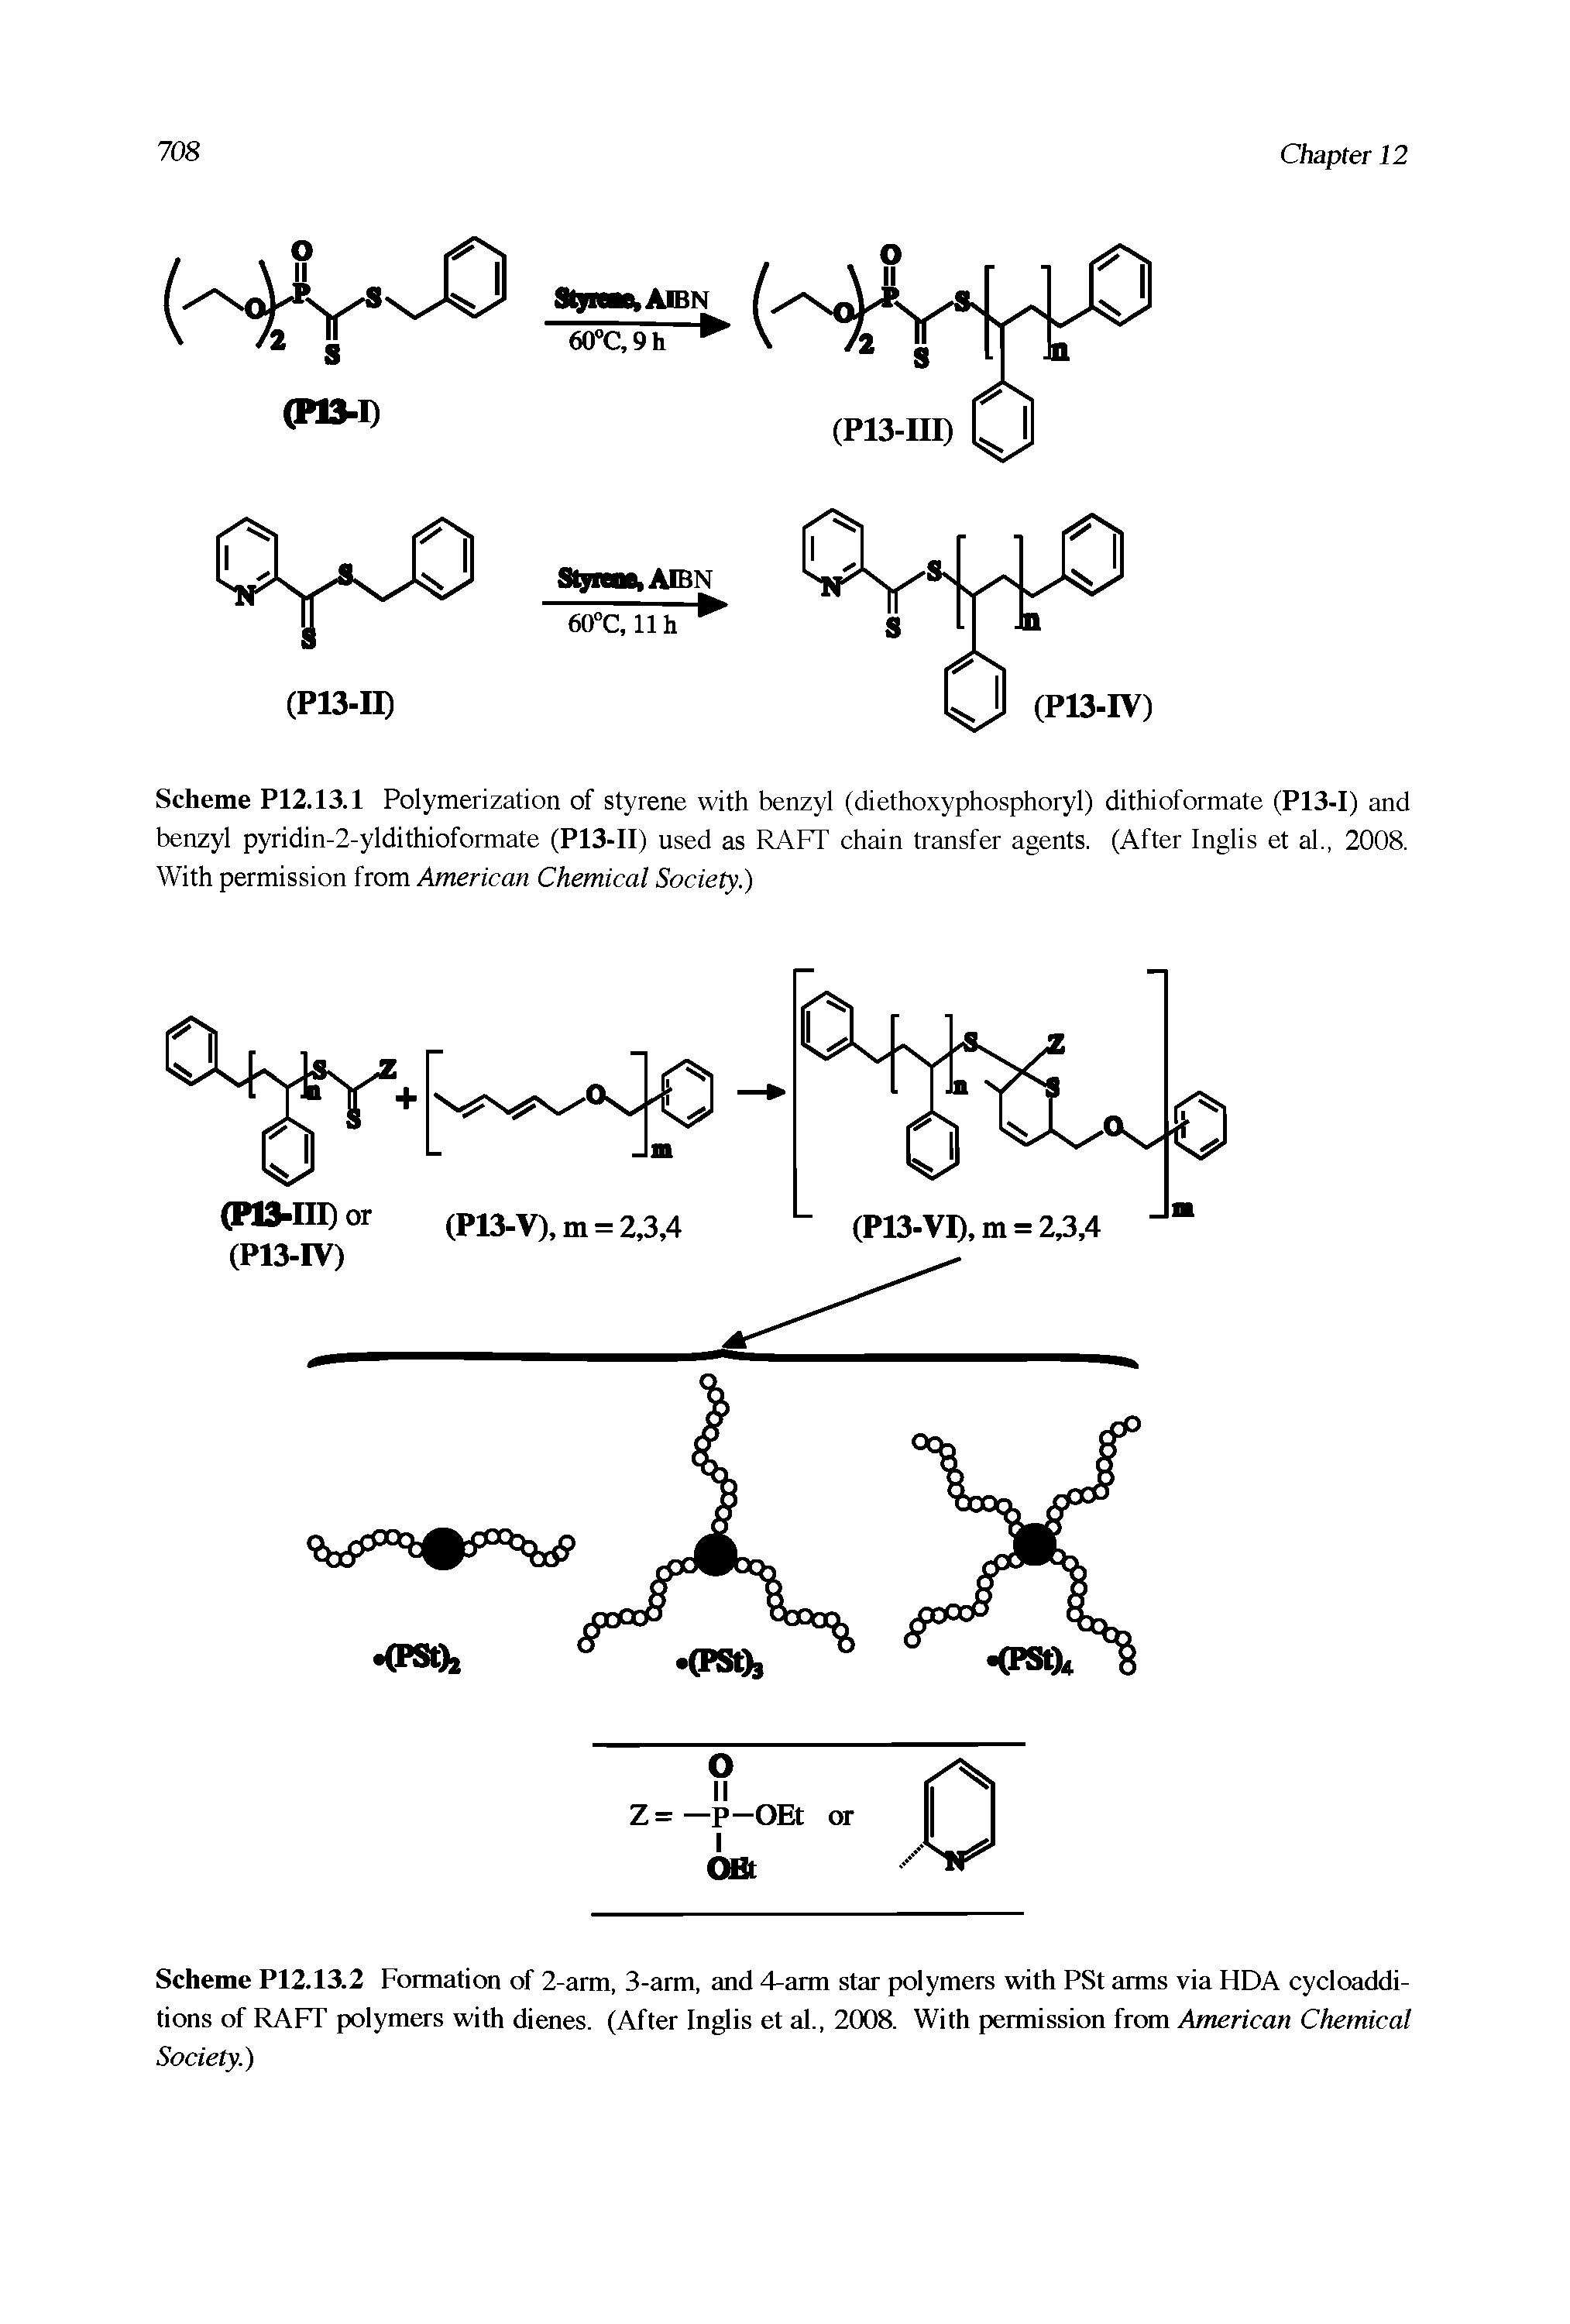 Scheme P12.13.2 Formation of 2-arm, 3-arm, and 4-arm star polymers with PSt arms via HDA cycloadditions of RAFT polymers with dienes. (After Inglis et al., 2008. With permission from American Chemical Society.)...